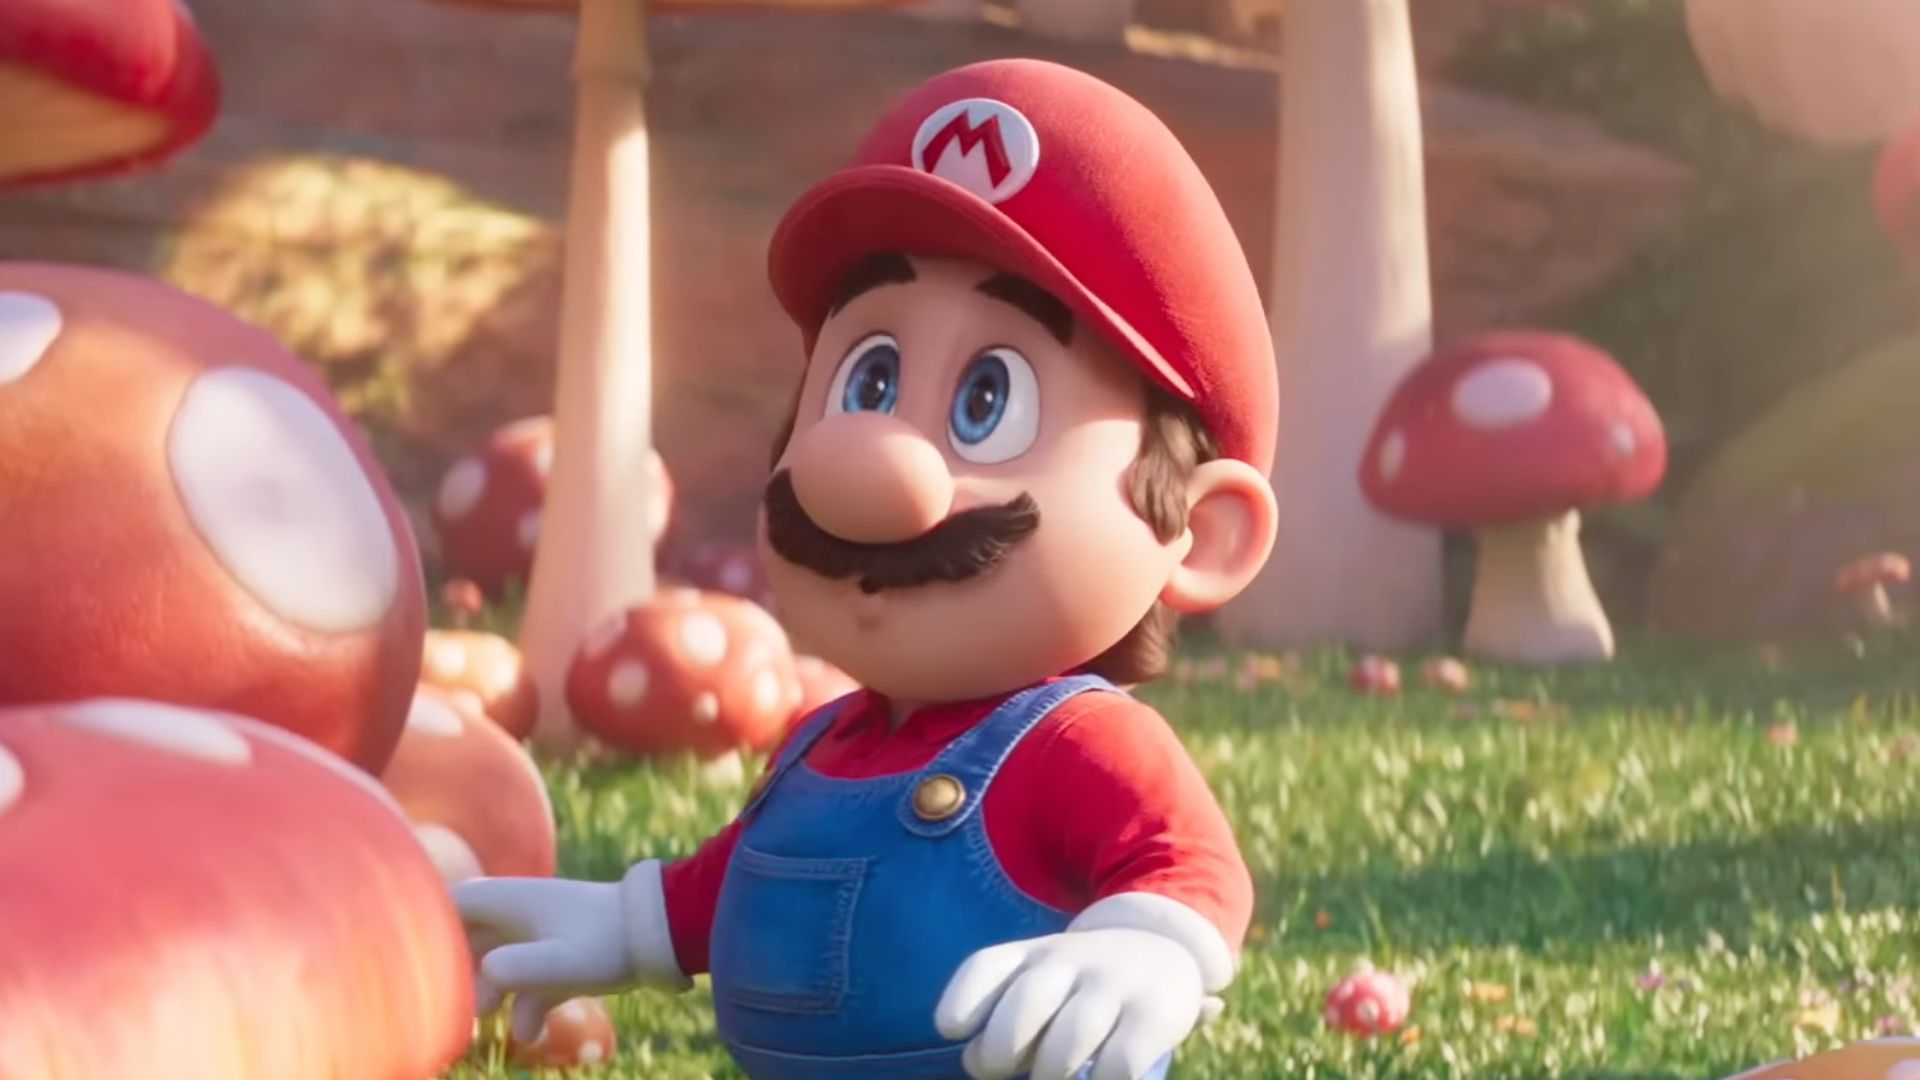 Nintendo Pictures is hiring staff for post-Mario movie plans